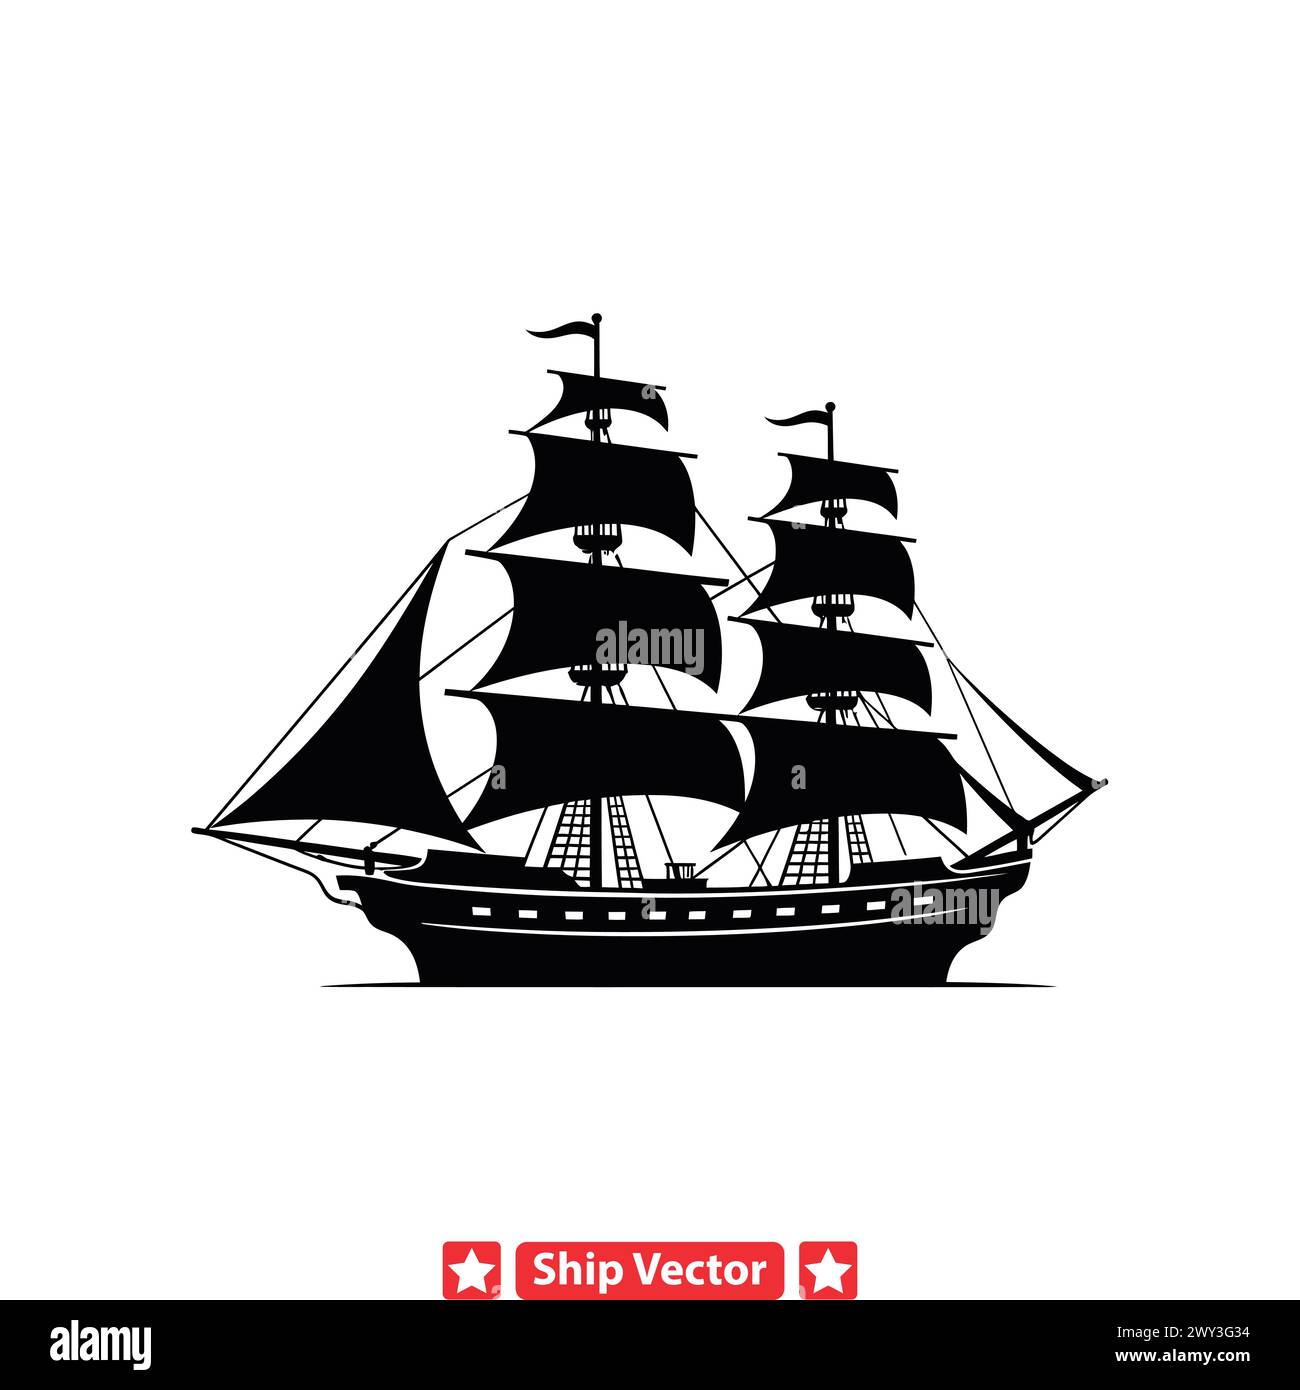 Harbor Tales  Vibrant Ship Silhouettes Depicting the Bustle and Energy of Port Cities Stock Vector